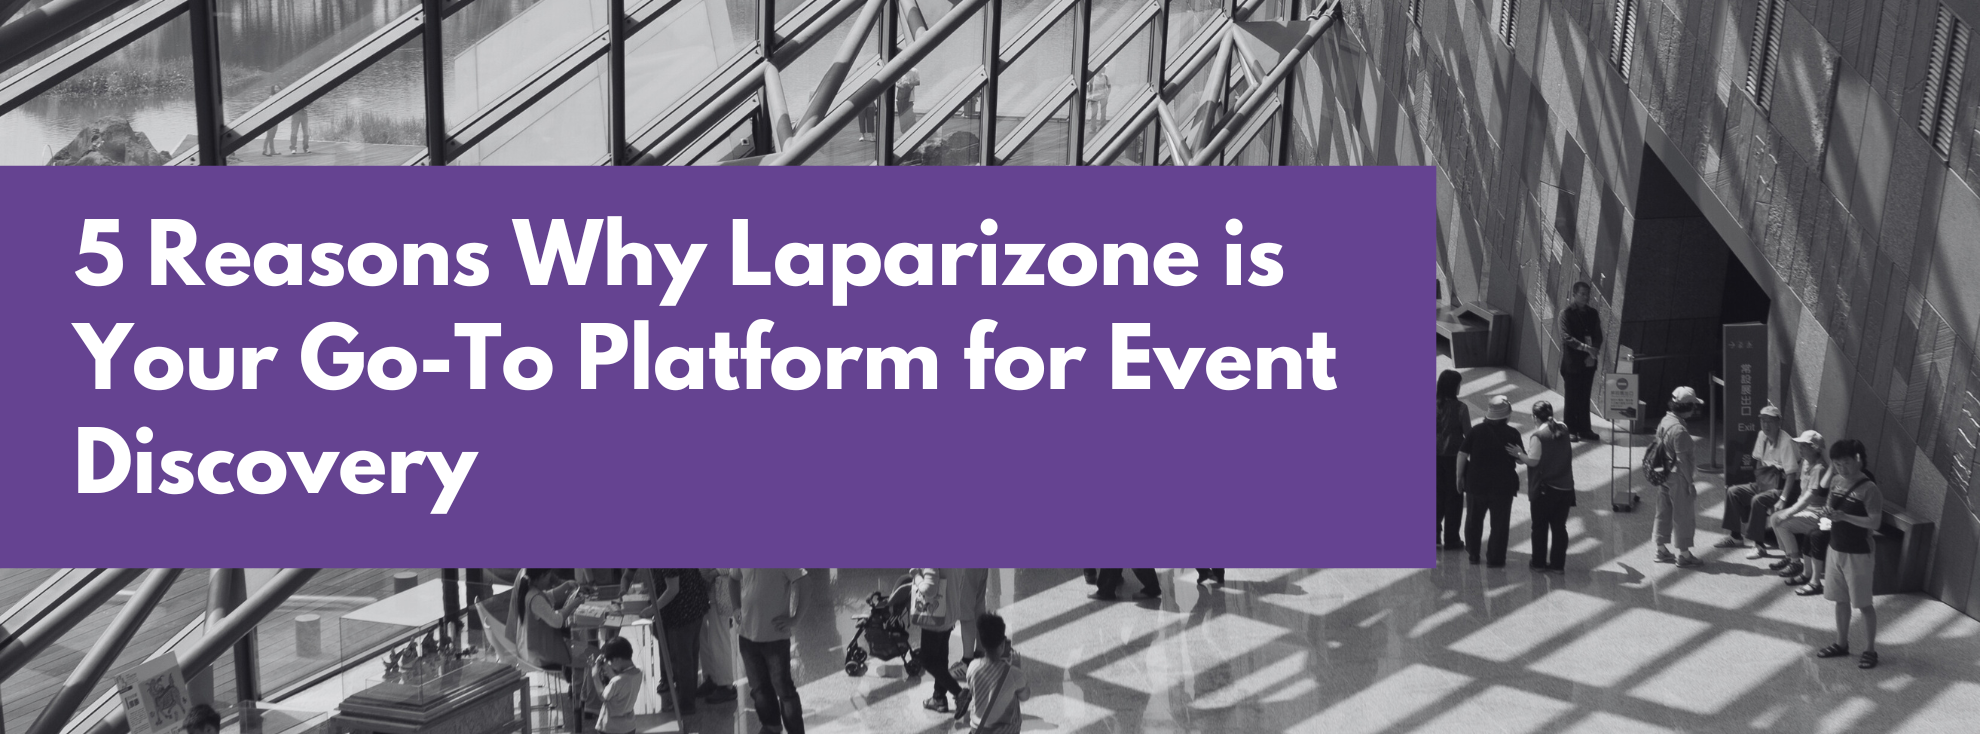 5 Reasons Why Laparizone is Your Go-To Platform for Event Discovery - Featured Image